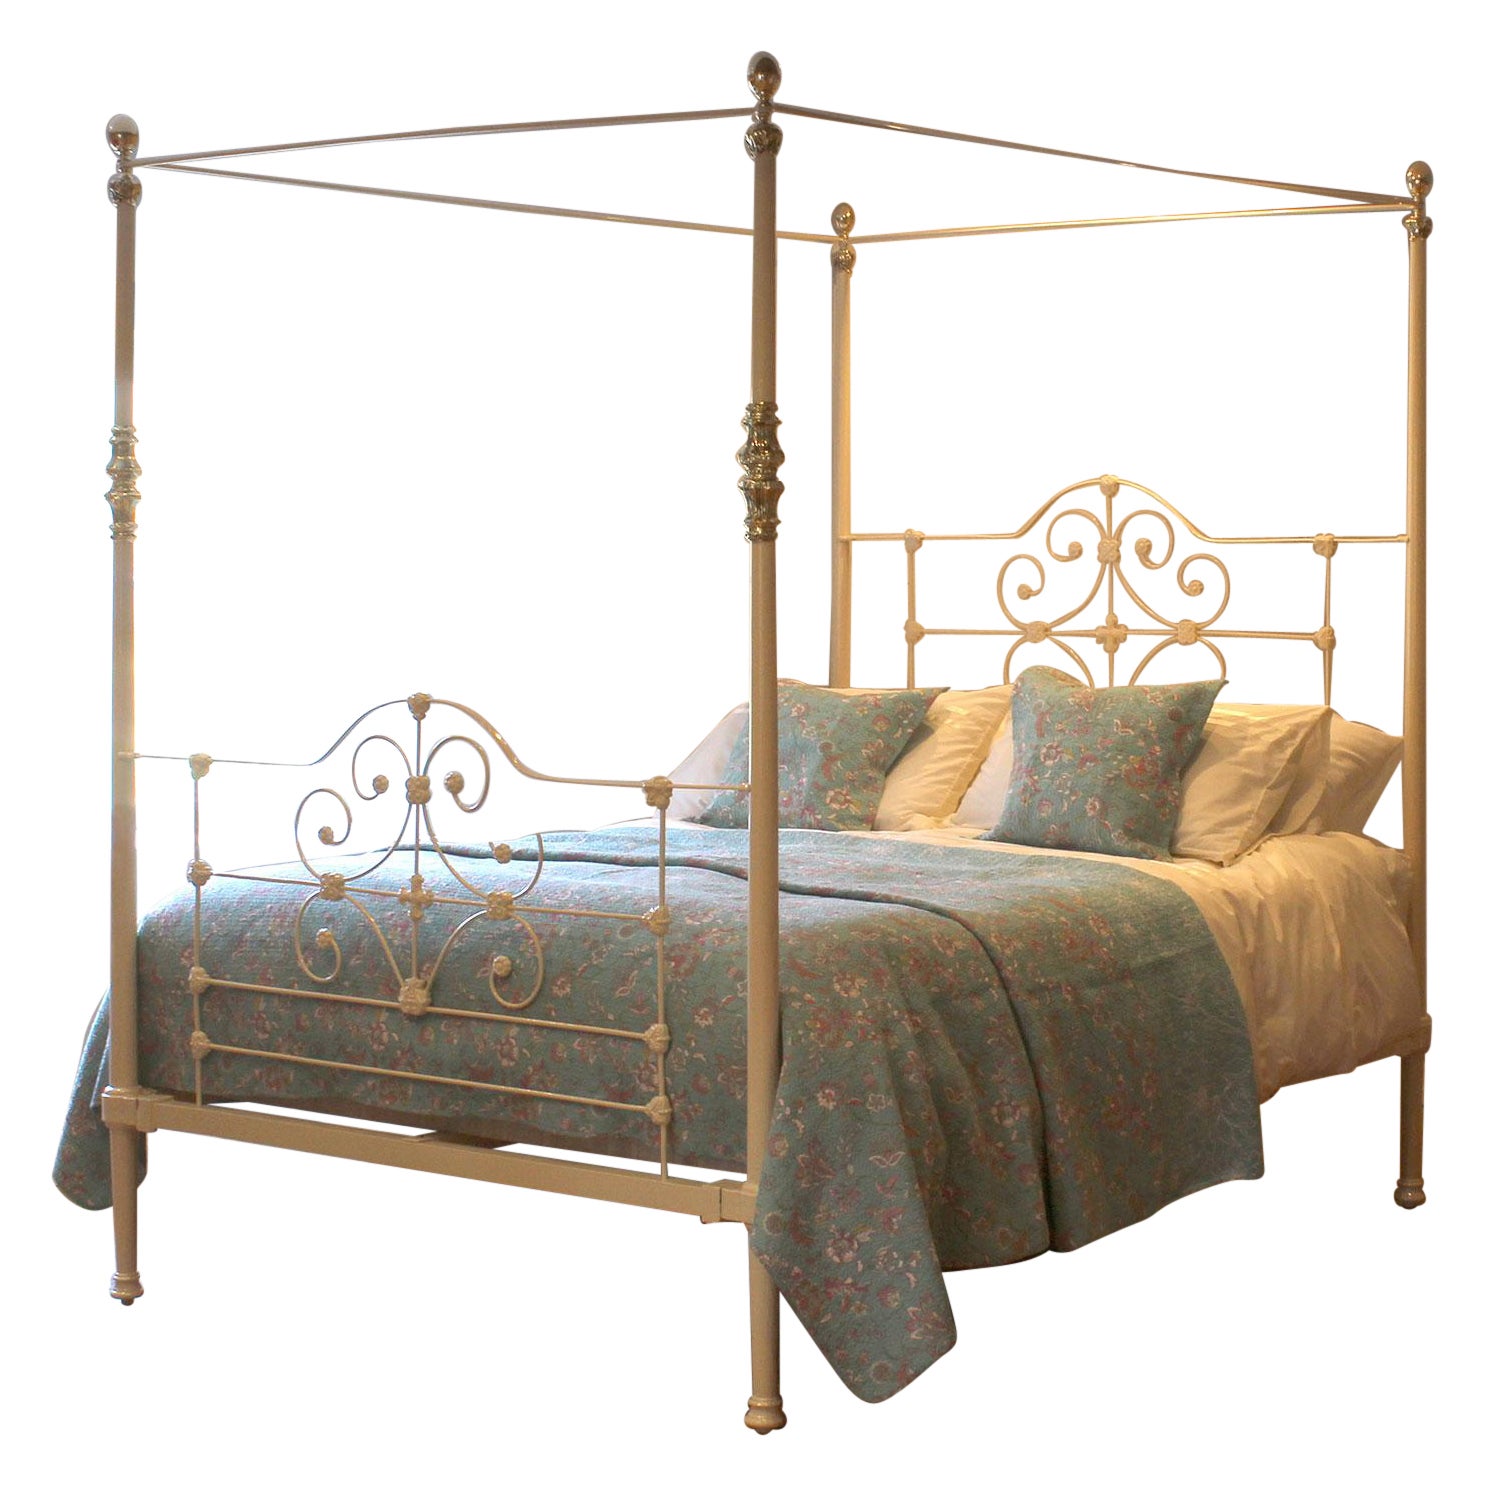 5ft Wide Cast Iron Four Poster Bed in Cream, M4P49